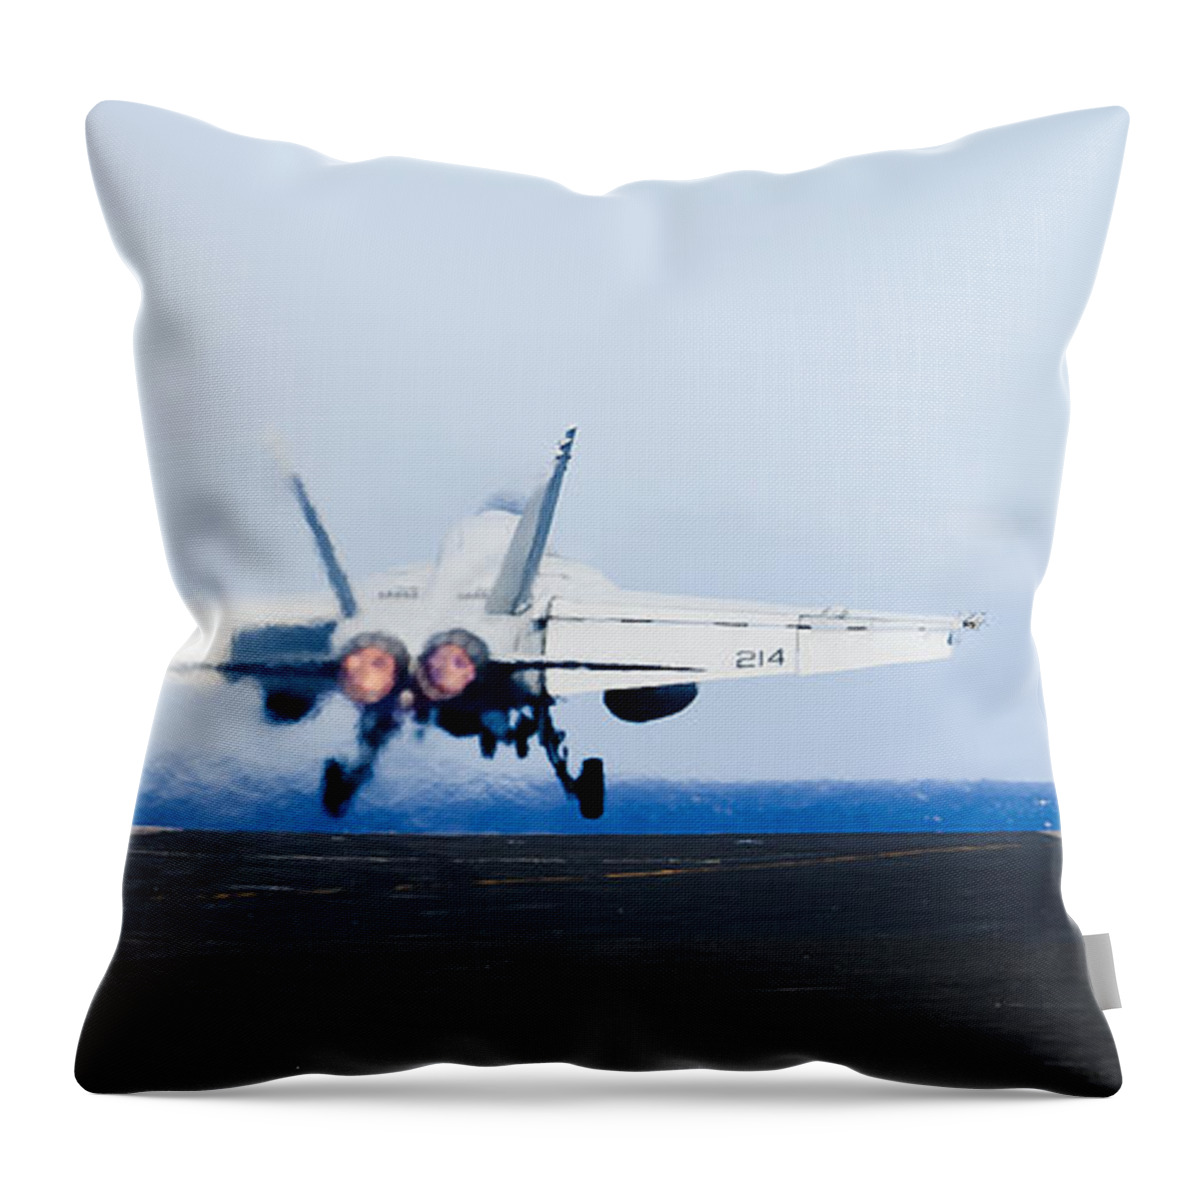 Afterburner Throw Pillow featuring the photograph An Fa-18e Super Hornet Launches #11 by Stocktrek Images